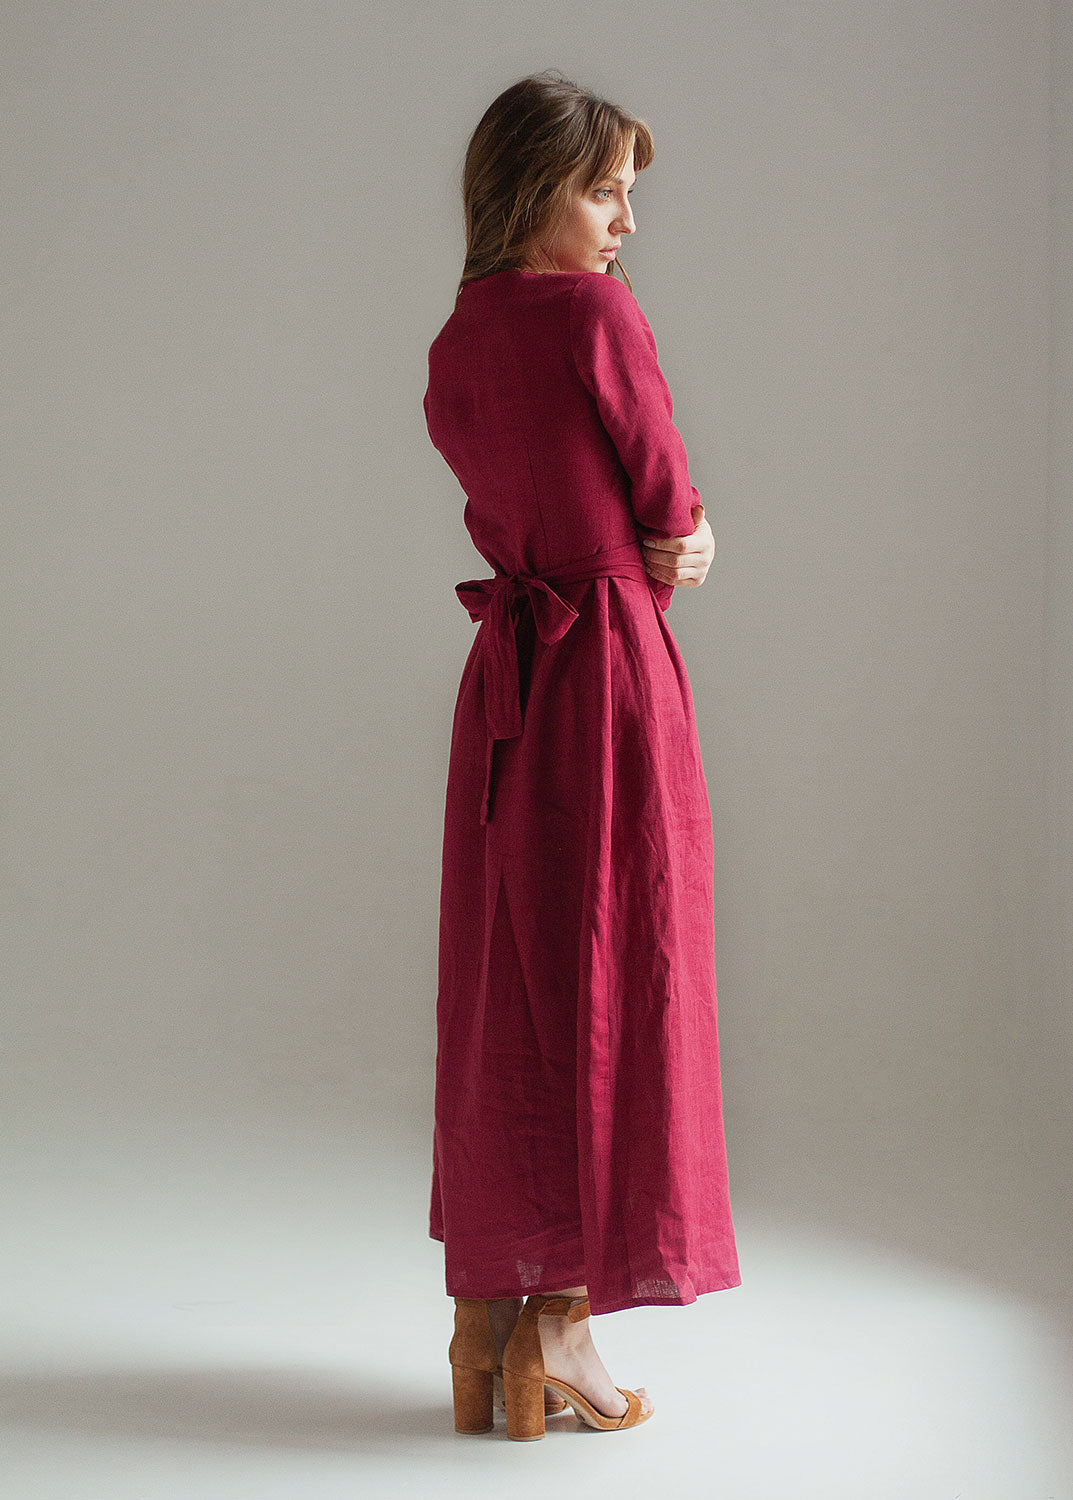 "Tristan" Burgundy Maxi Dress with sleeves